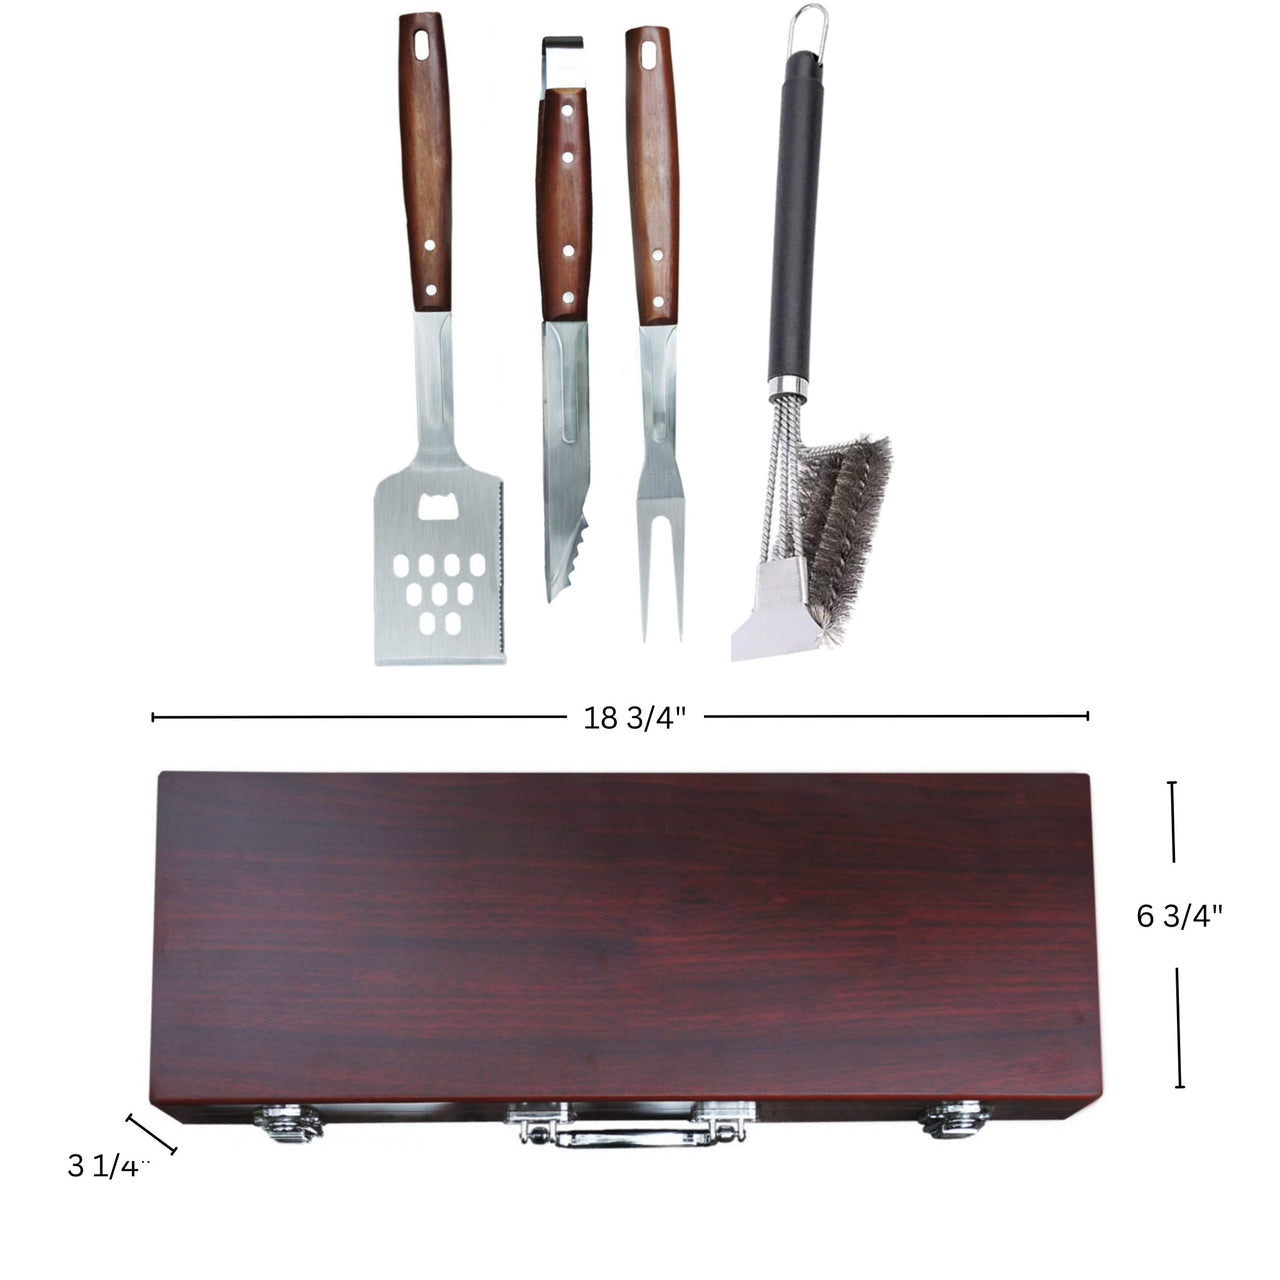 Personalized BBQ Grill Tool Set with Rosewood Case